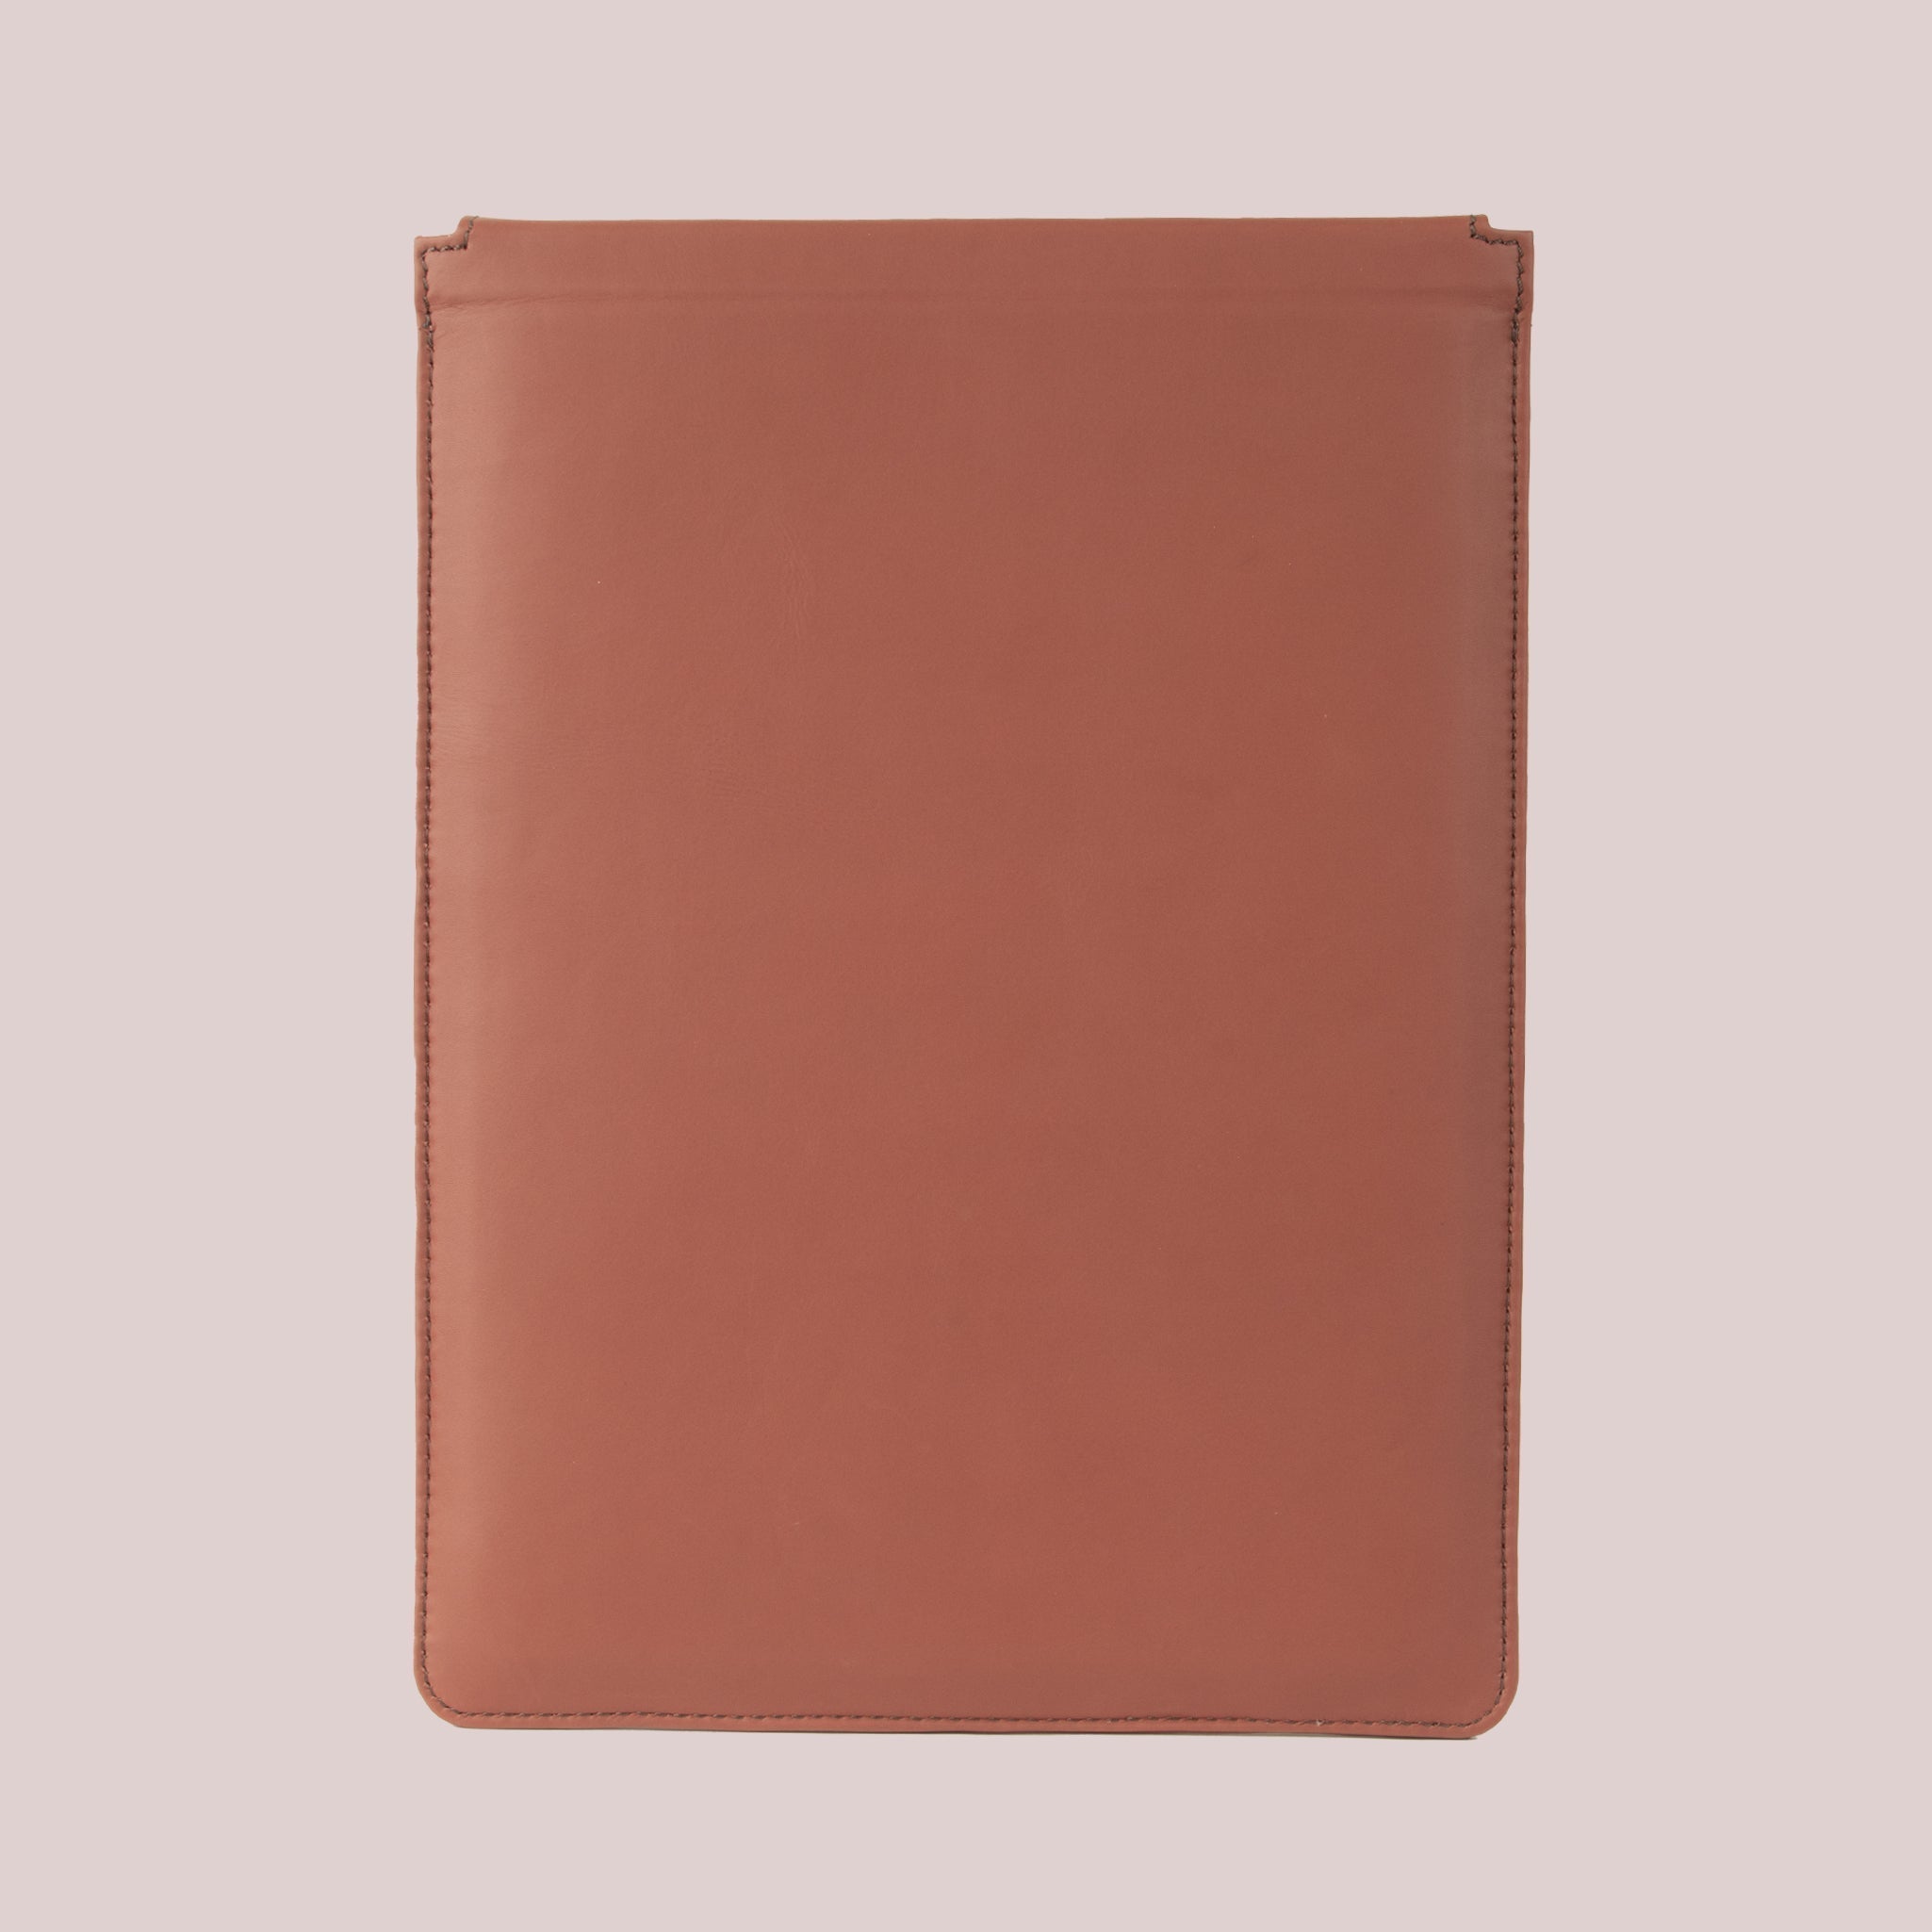 Order Macbook leather sleeve in a stylish brown color